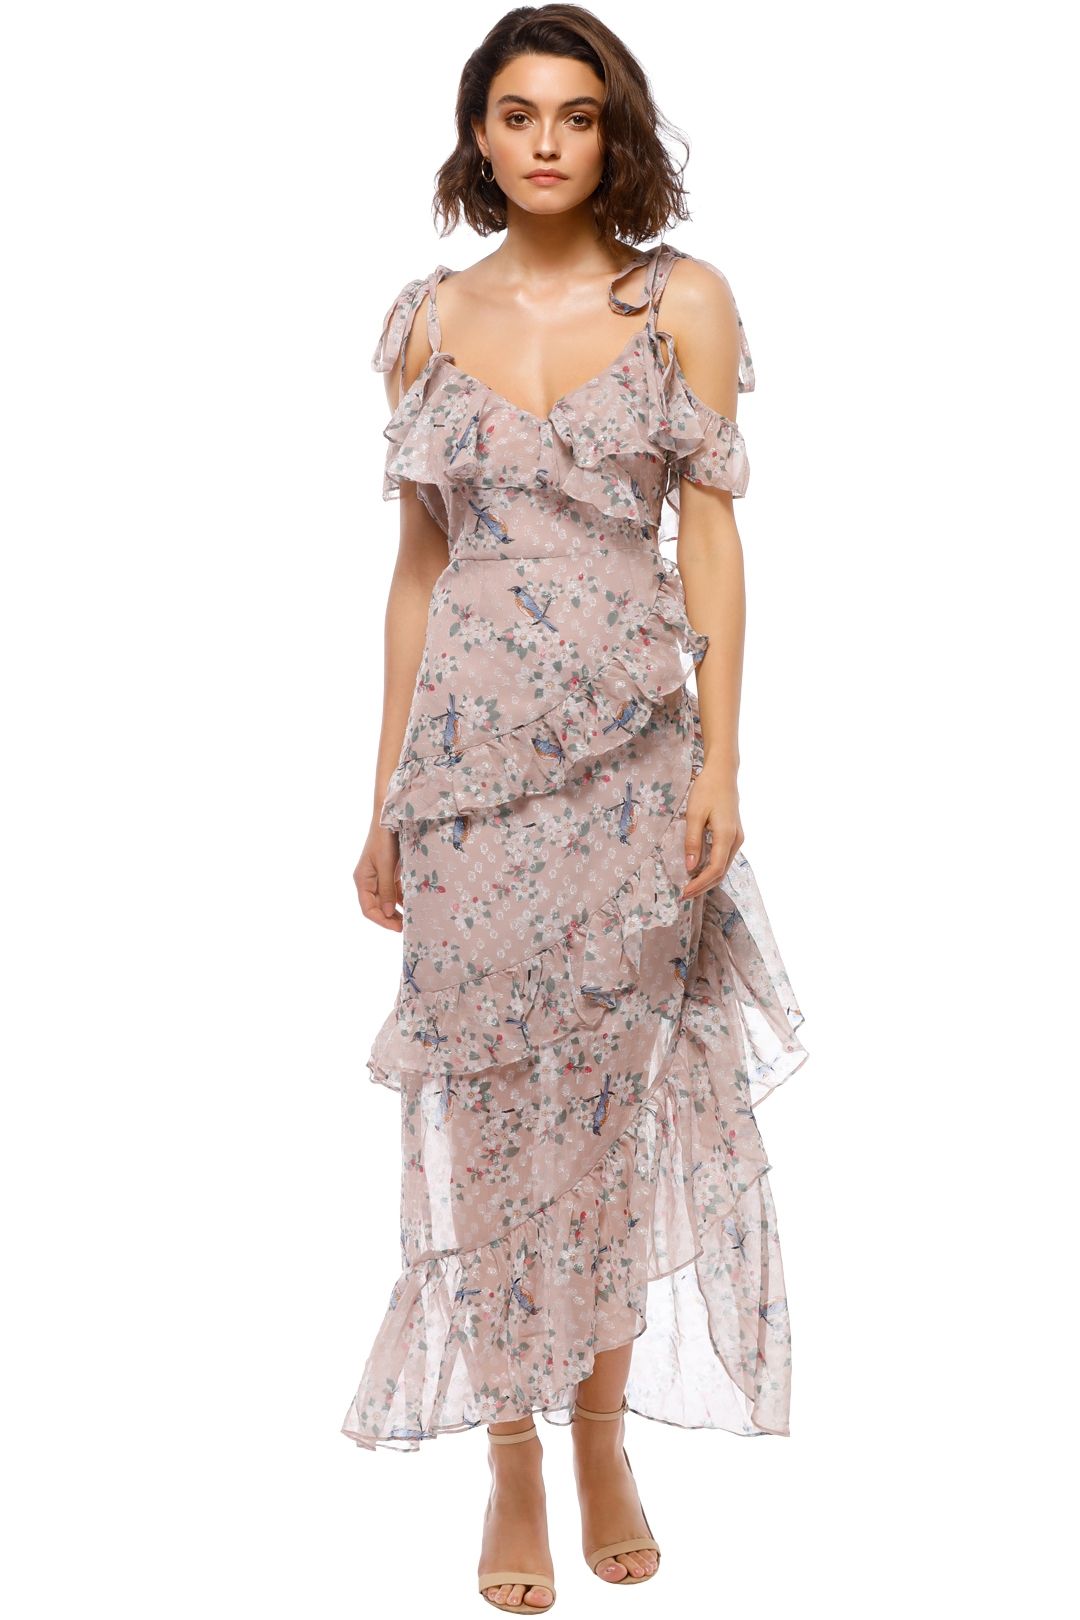 We Are Kindred - Pippa Ruffle Maxi Dress - Pastel Pink - Front